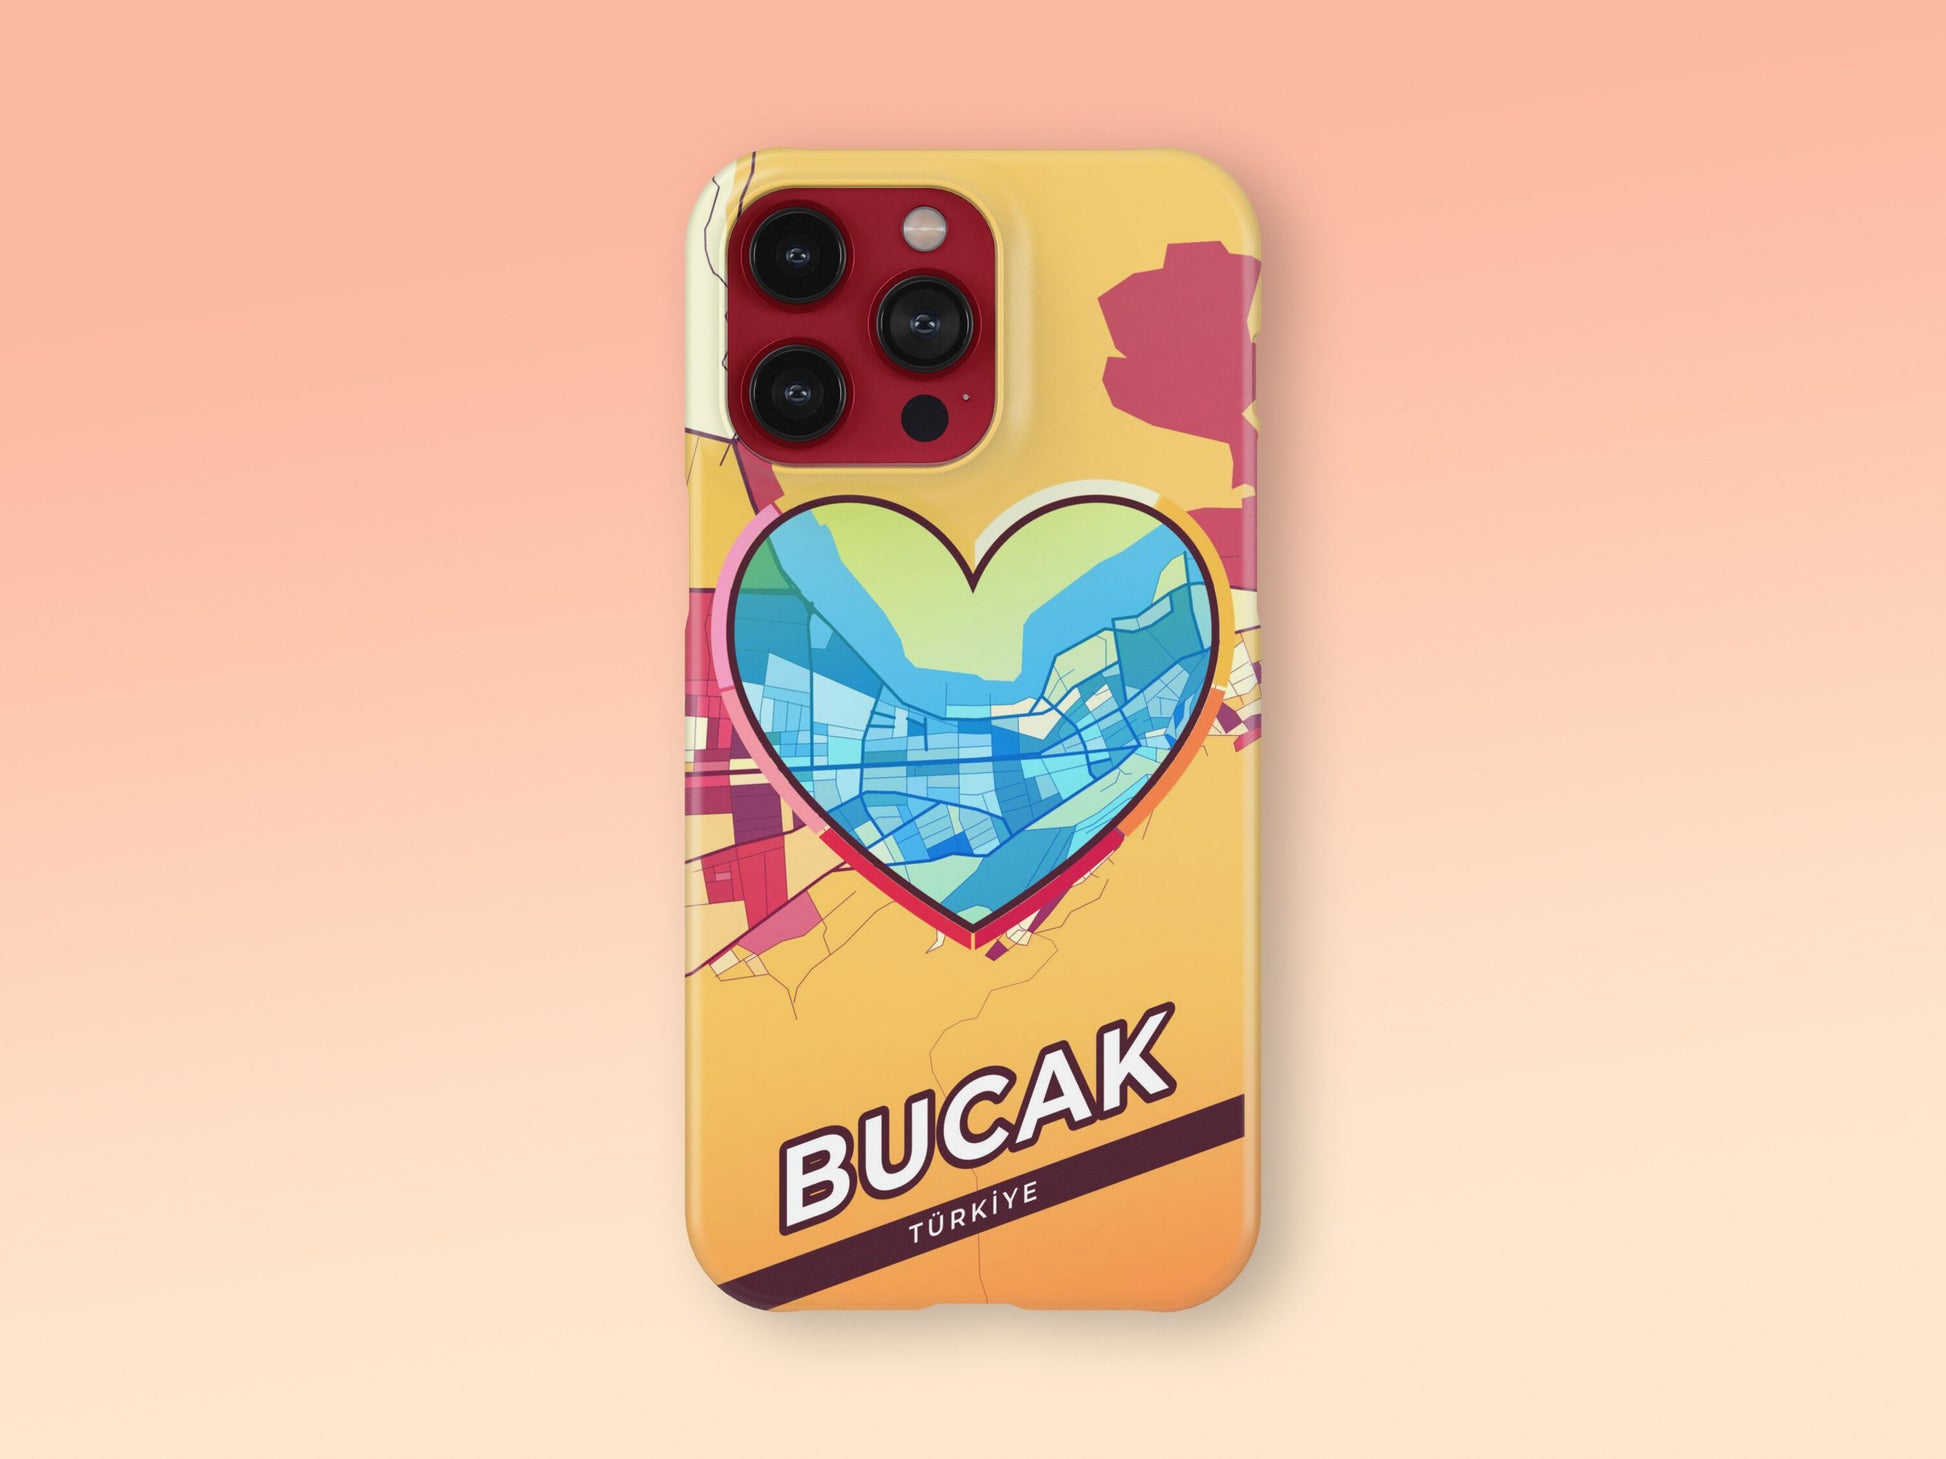 Bucak Turkey slim phone case with colorful icon. Birthday, wedding or housewarming gift. Couple match cases. 2